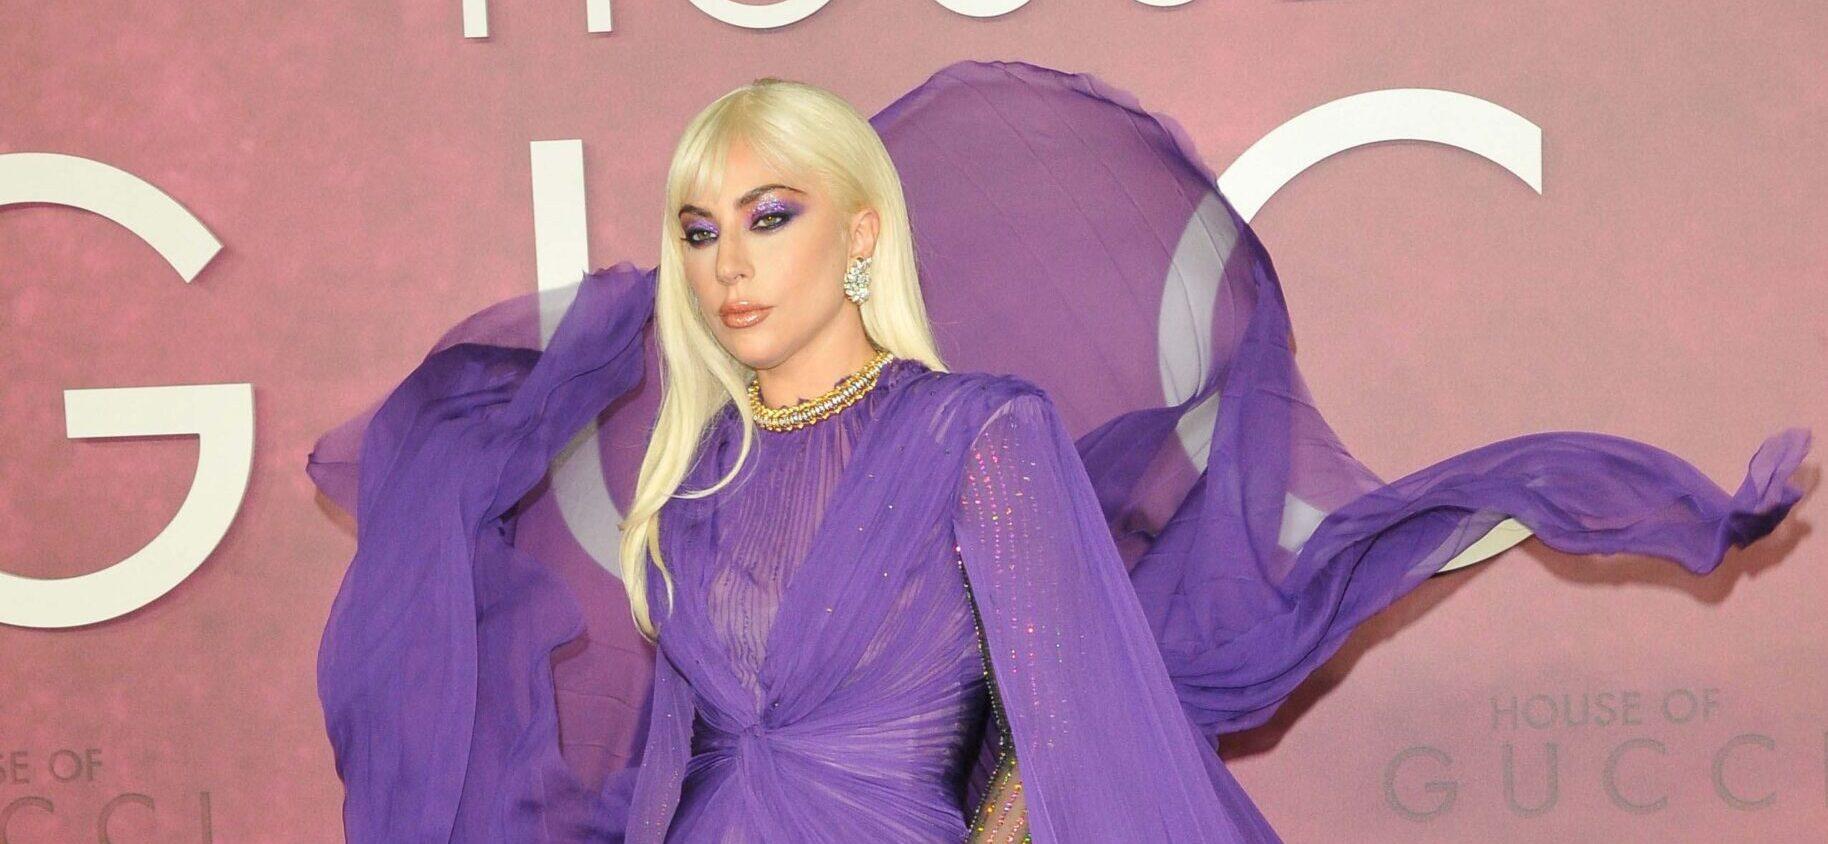 Lady Gaga (Stefani Germanotta) at the "House of Gucci" UK film premiere, Odeon Luxe Leicester Square, Leicester Square, on Tuesday 09 November 2021 in London, England, UK.